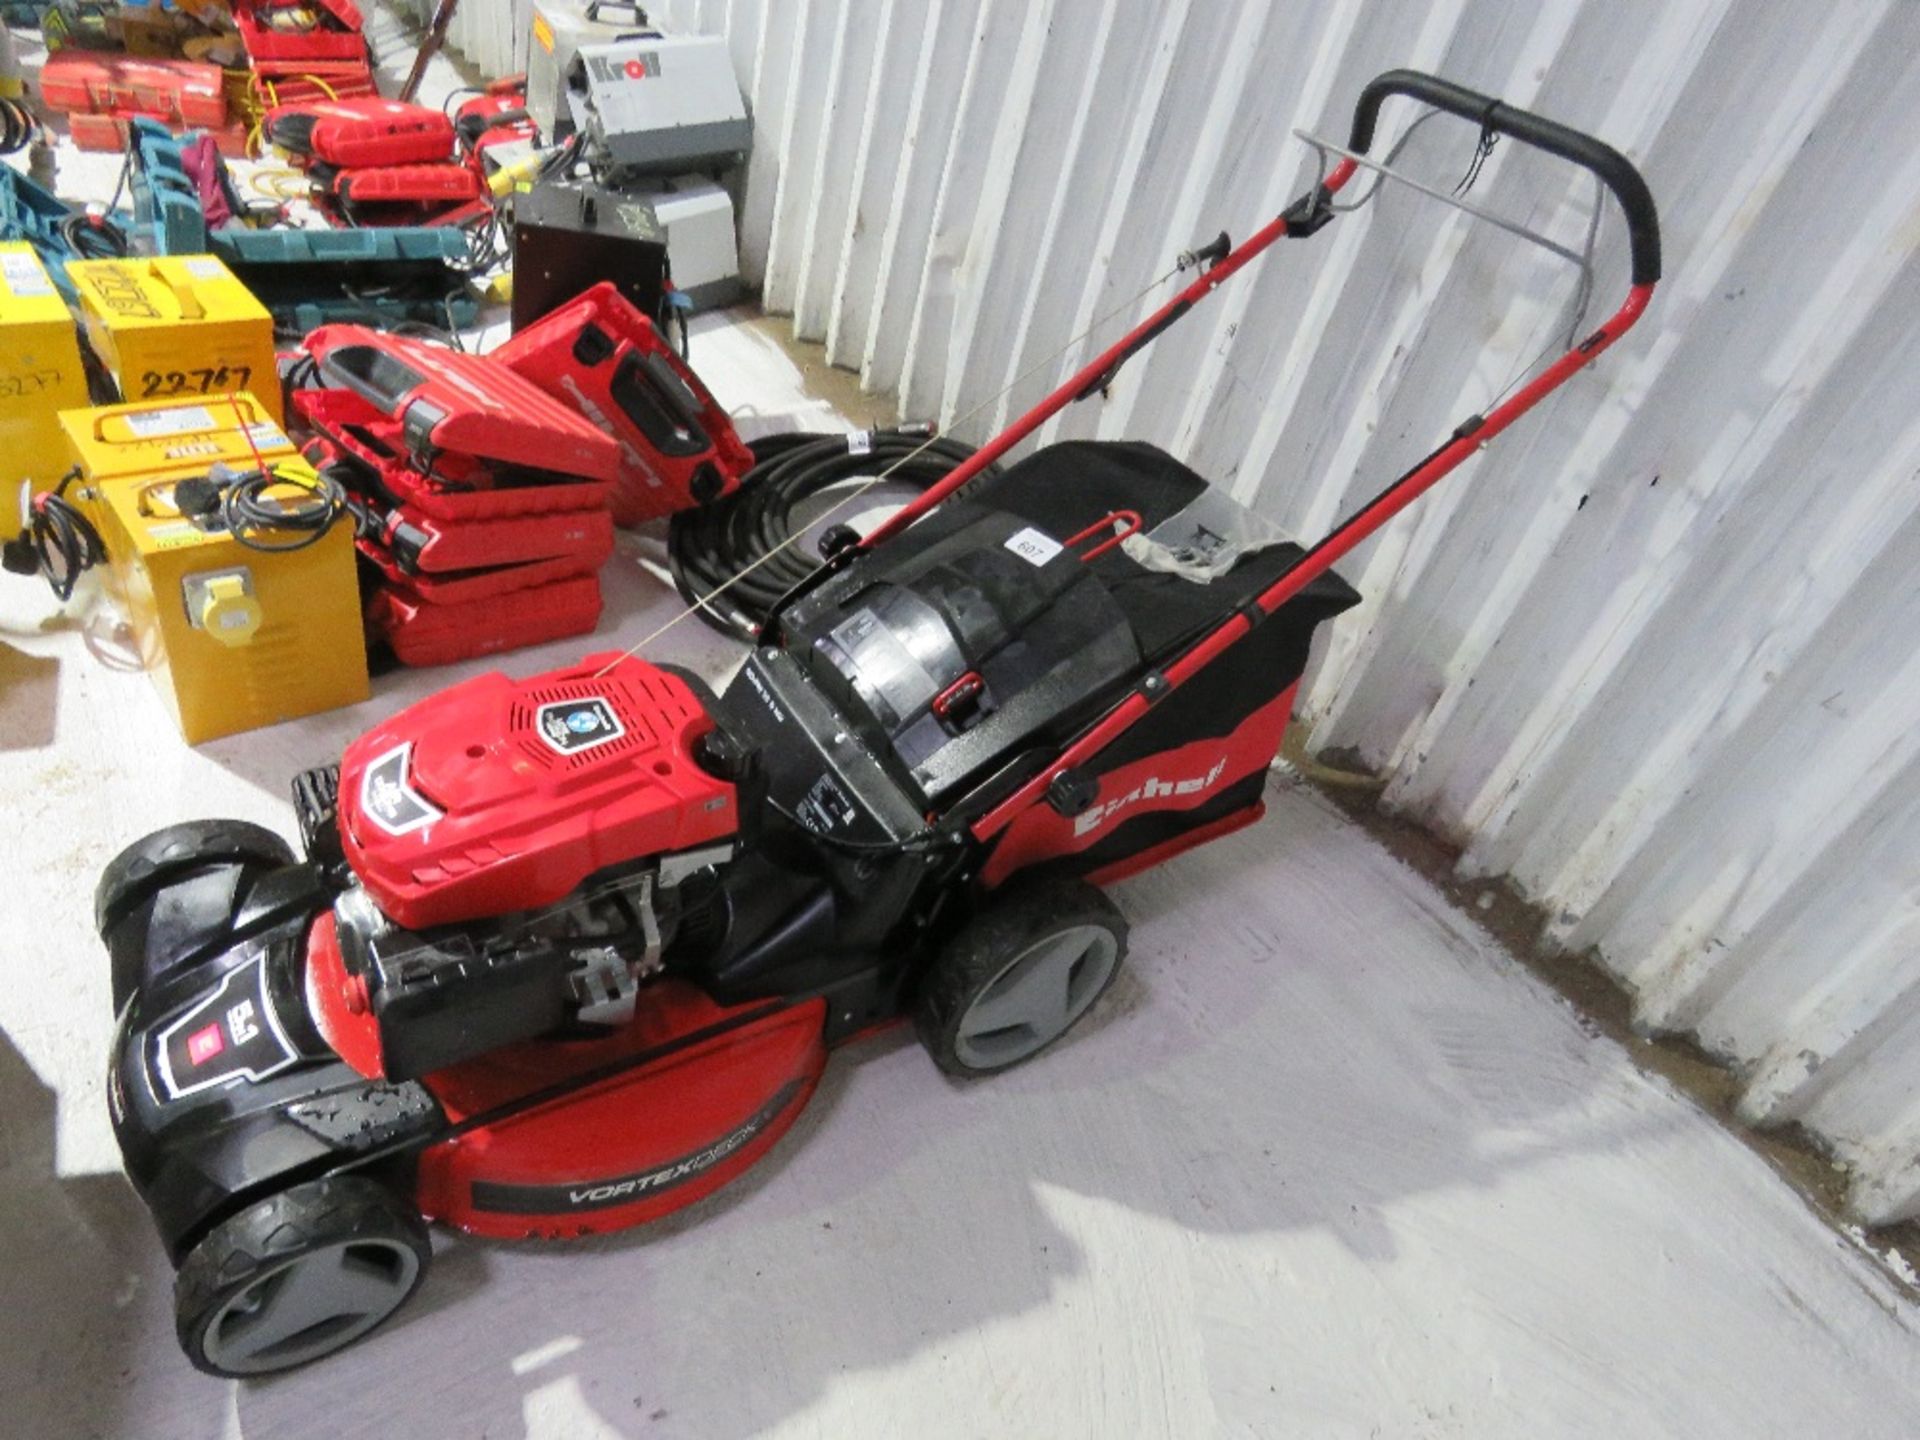 EINHELL HEAVY DUTY PETROL ENGINED MOWER WITH COLLECTOR, OWNER RETIRING. THIS LOT IS SOLD UNDER TH - Bild 2 aus 4